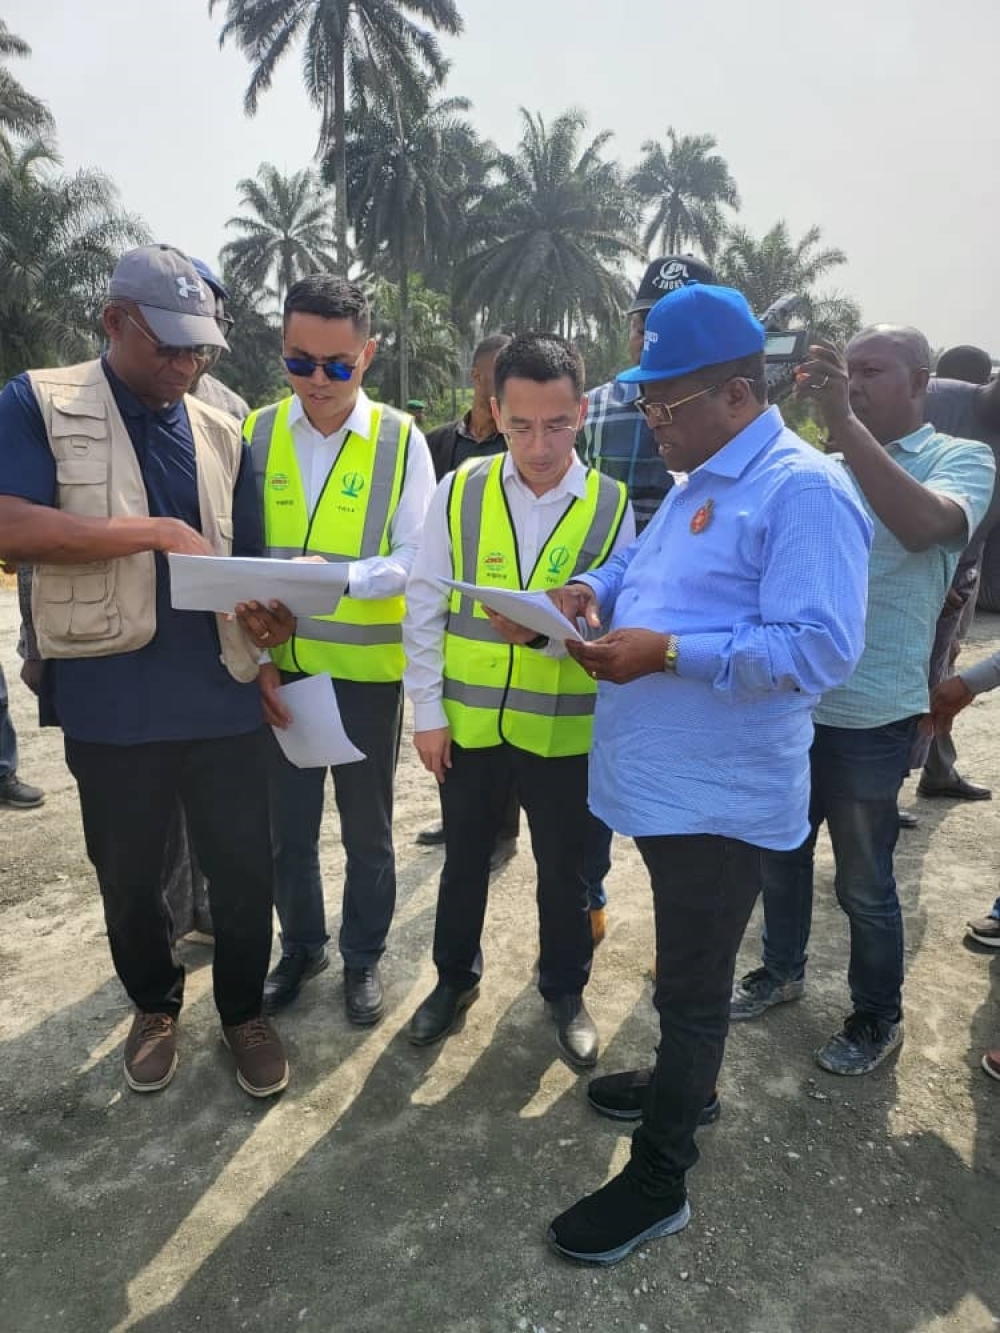 Works Minister, His Excellency Sen. Engr Nweze David Umahi arriving in Nigeria from Cotonou, Benin Republic where he chaired a Steering Committee on the construction of Lagos- Abidjan Highway Corridor Development Project on 15th December,2023,